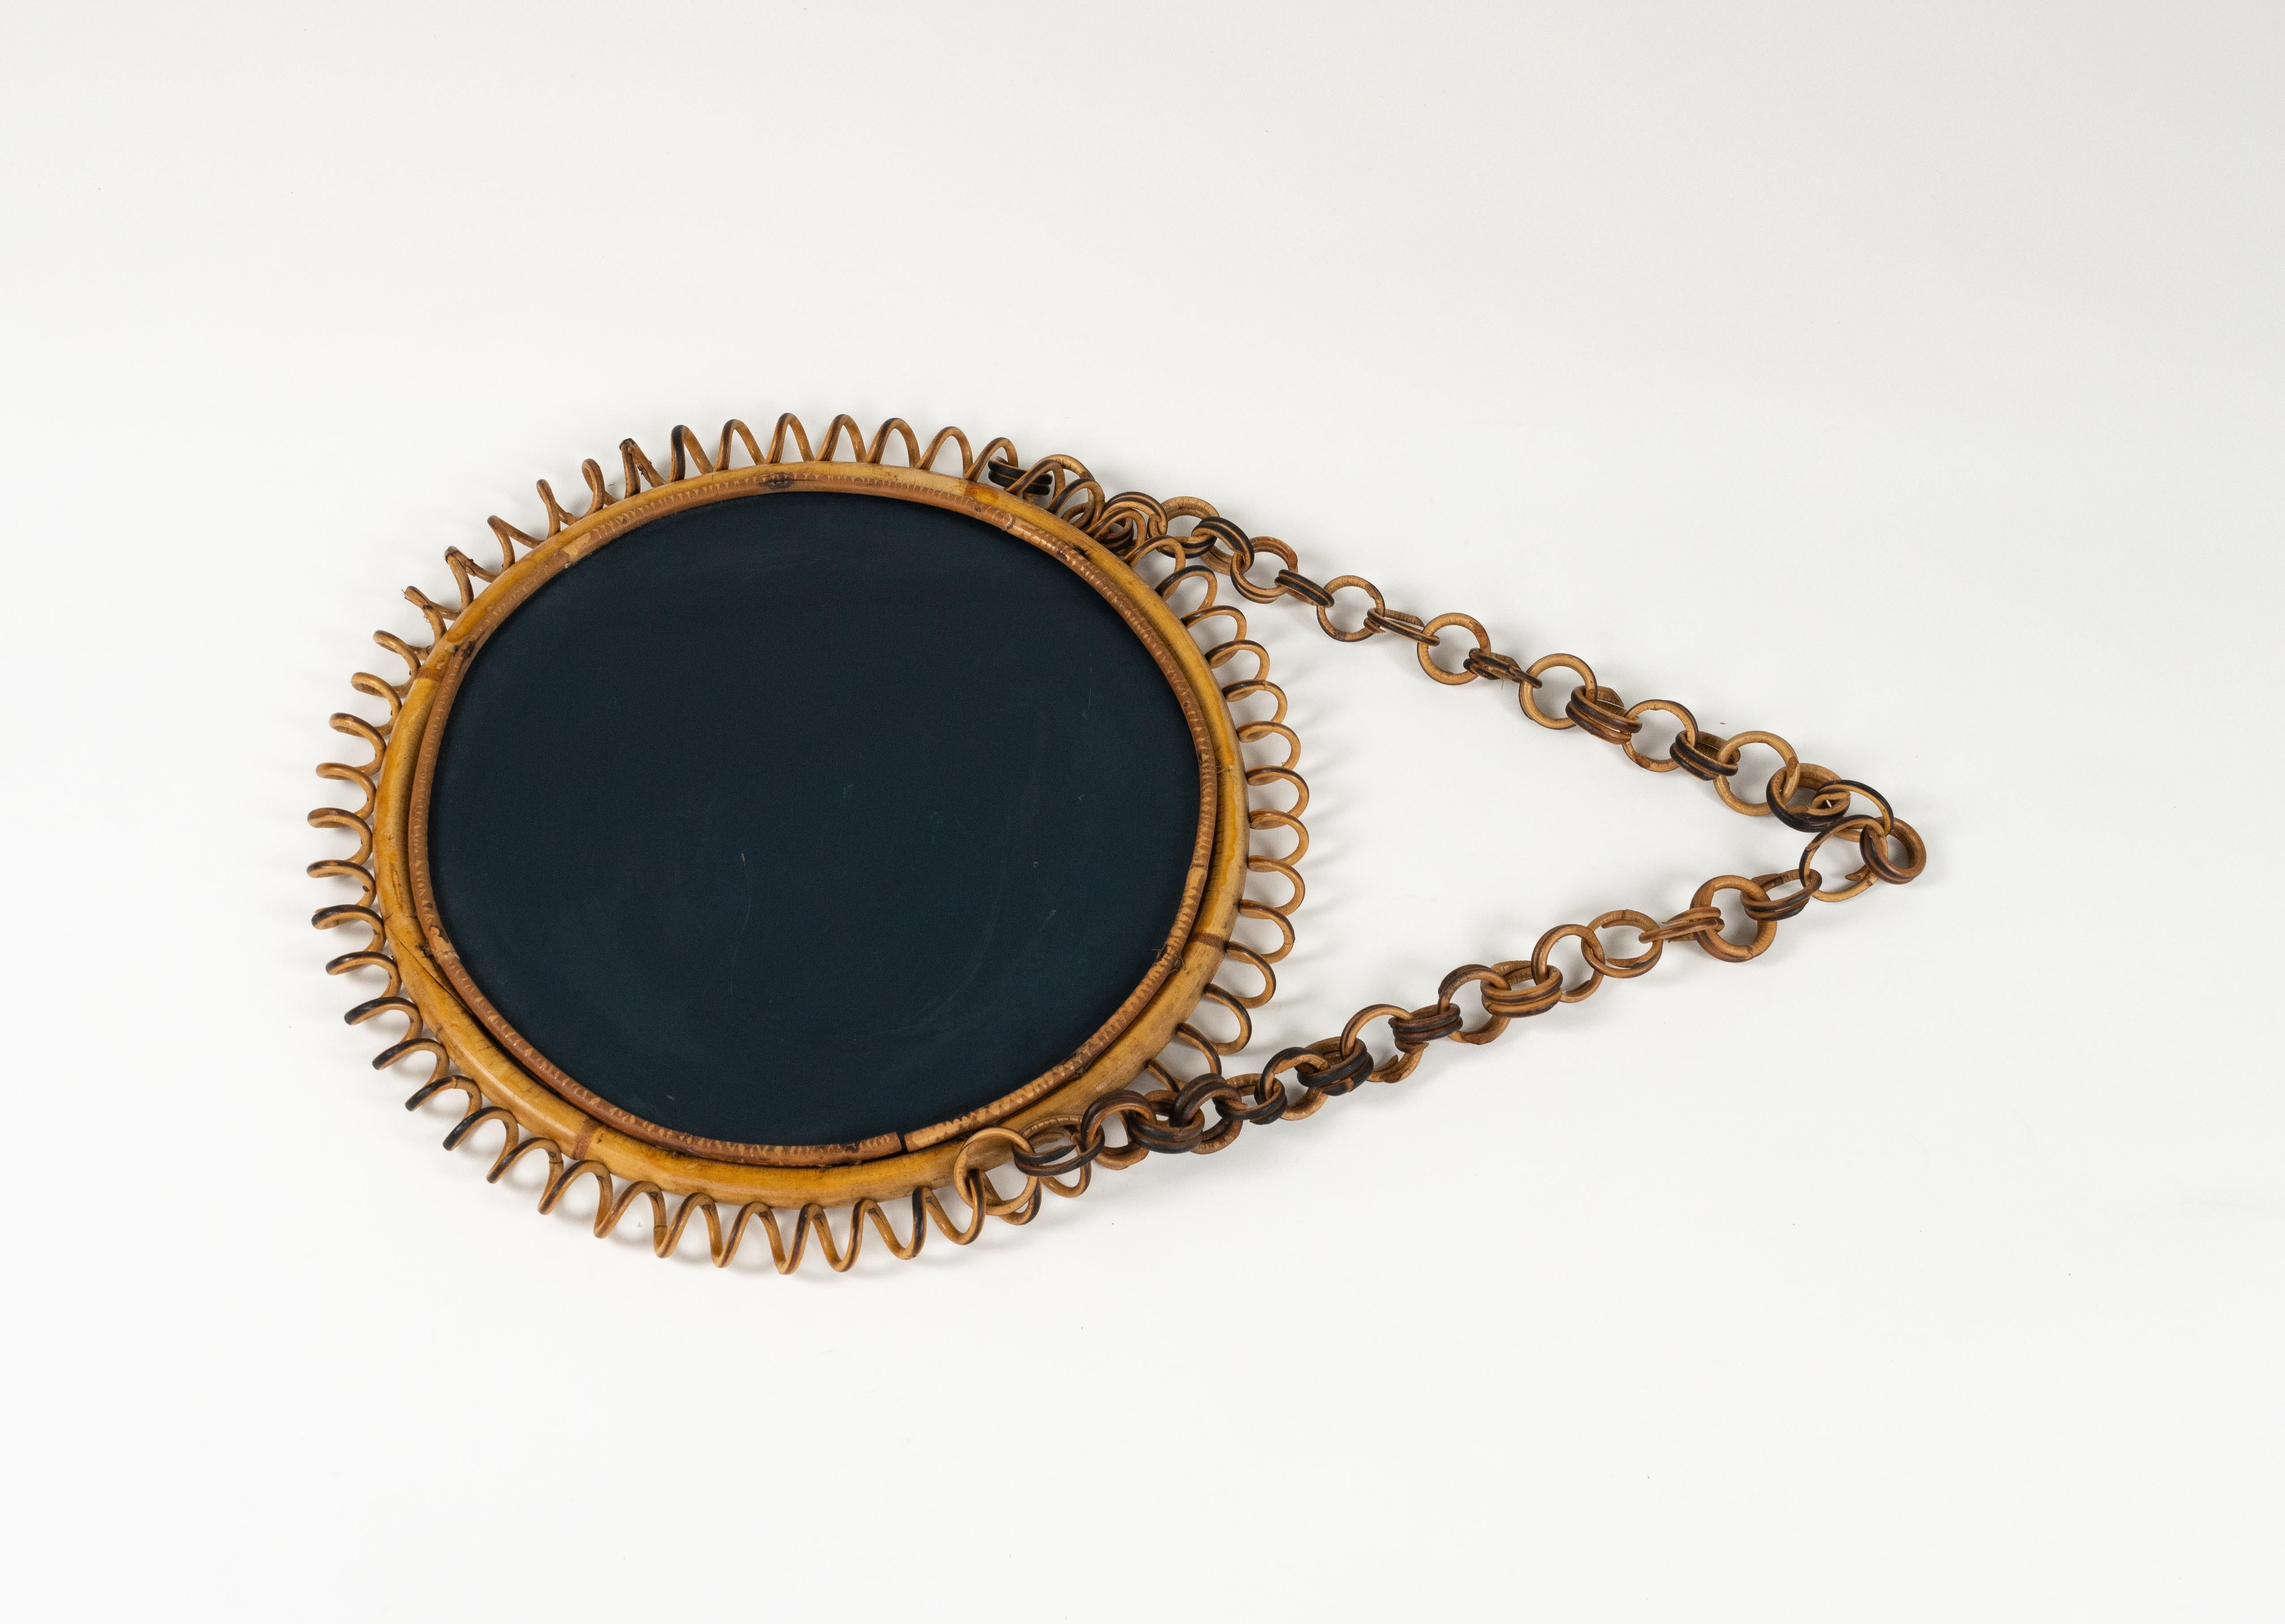 Midcentury Rattan and Bamboo Round Wall Mirror with Chain, Italy 1960s For Sale 9